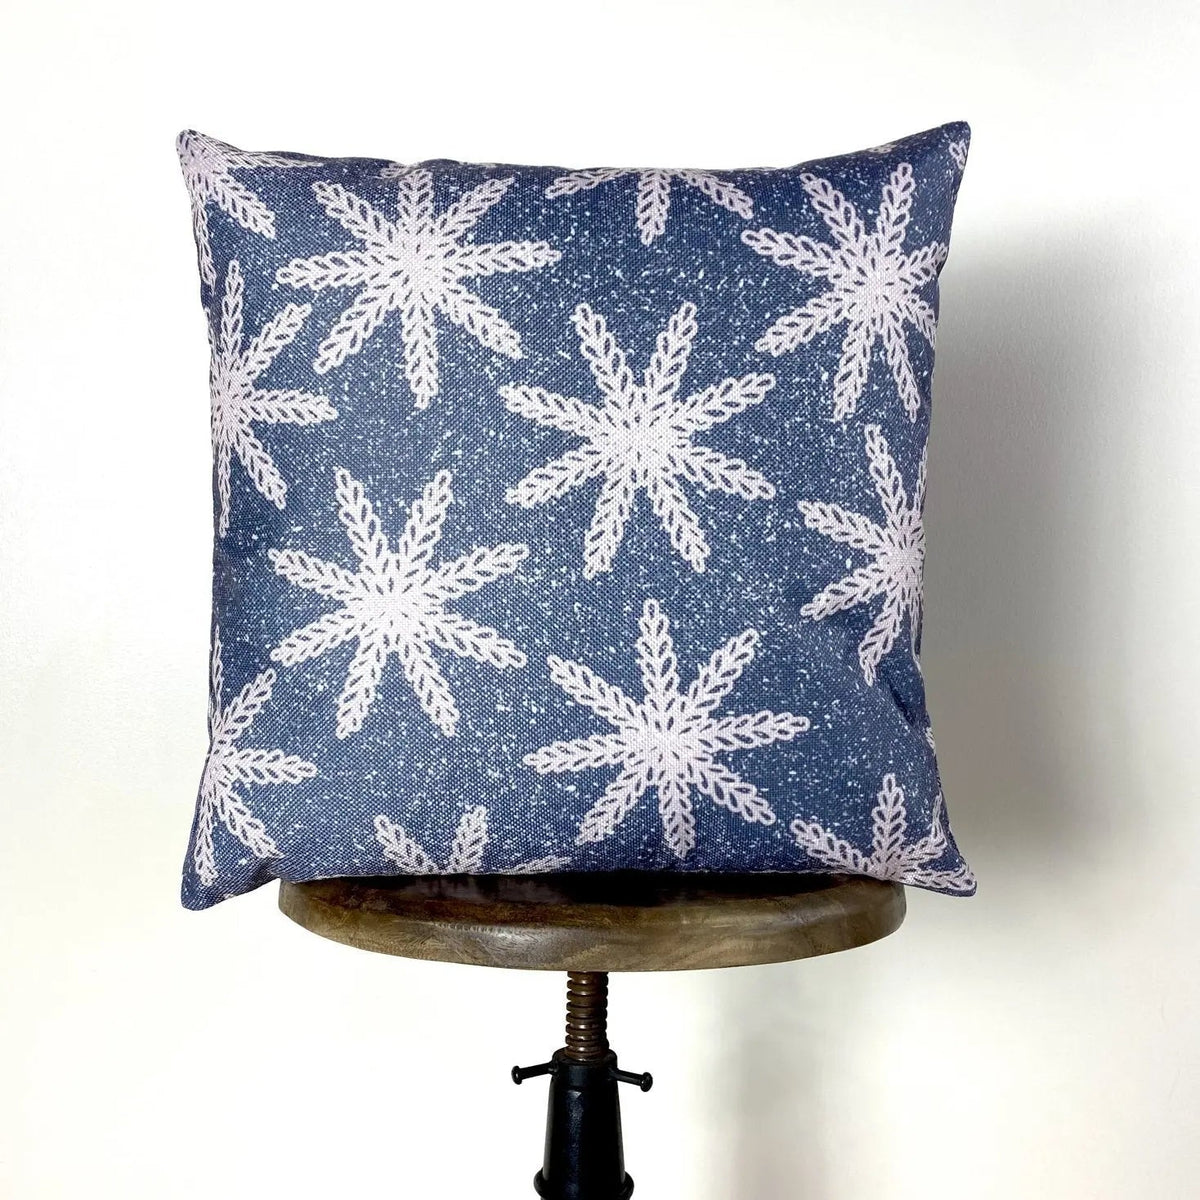 Ice Skating Pillow | Pillow Cover